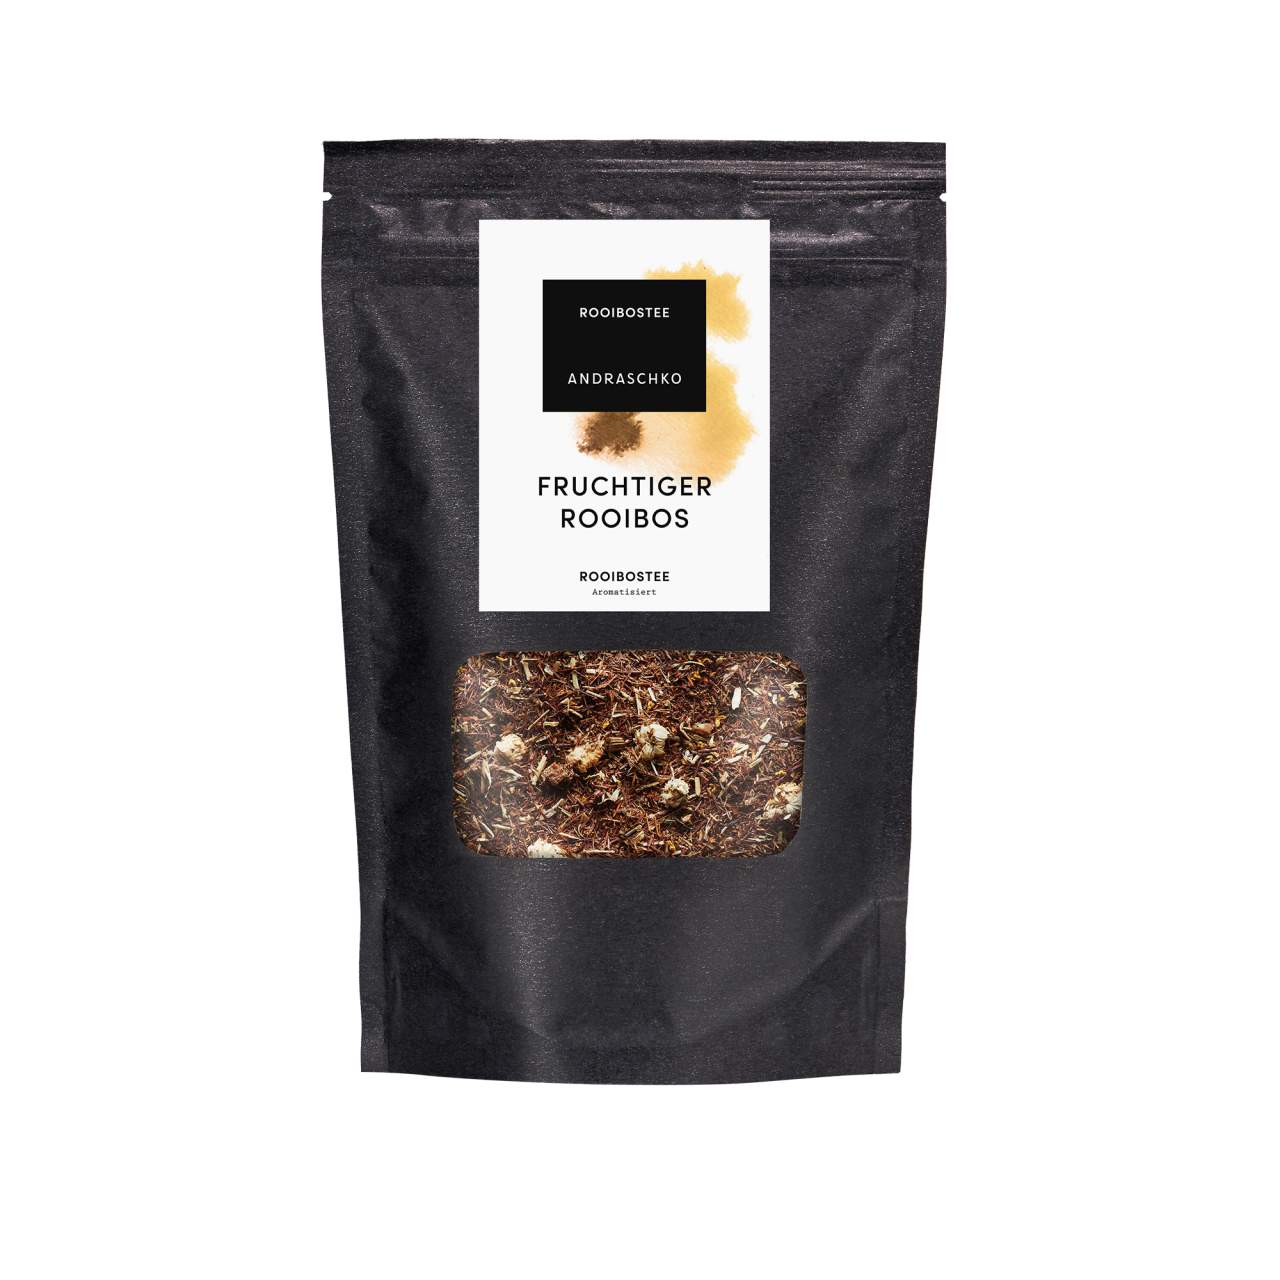 Fruchtiger Rooibos, Rooibostee 100g